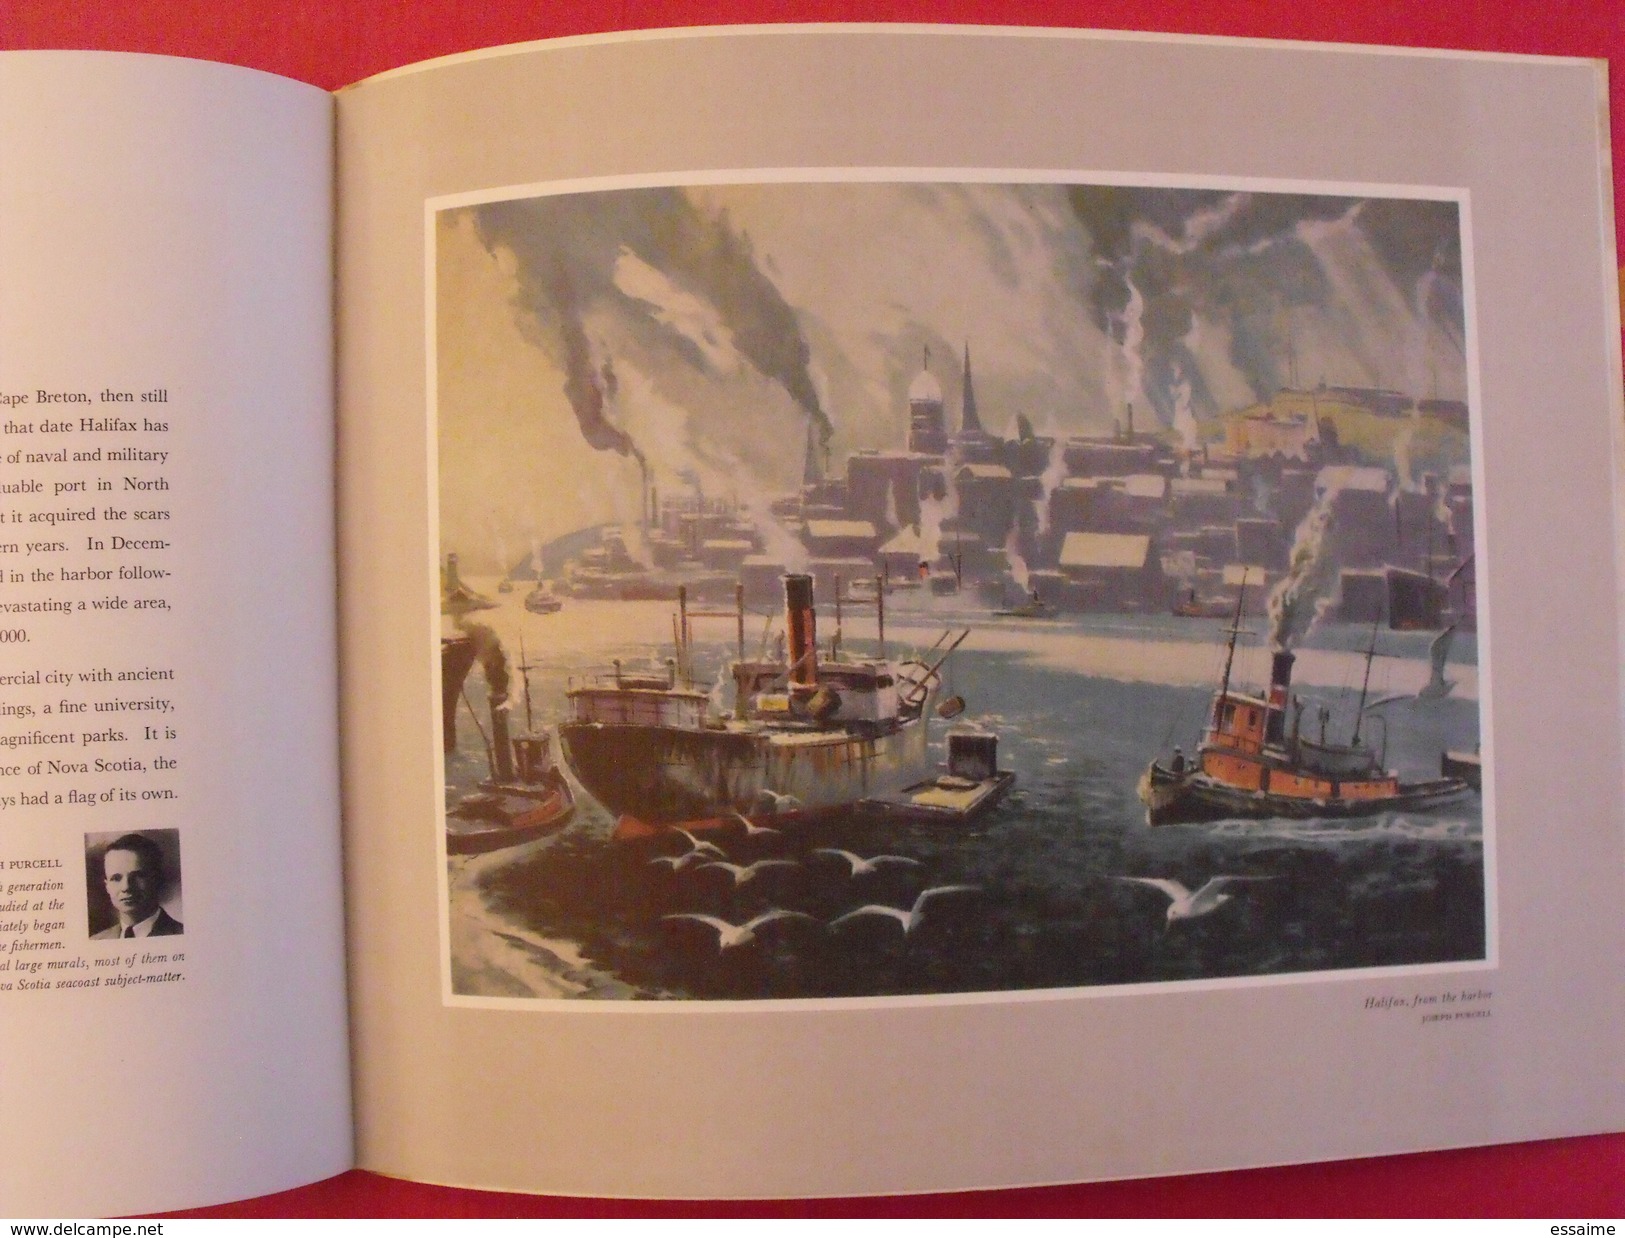 cities of Canada. 22 planches couleurs. peintures des villes. arbuckle hallam leighton bice... vers 1951. emboitage